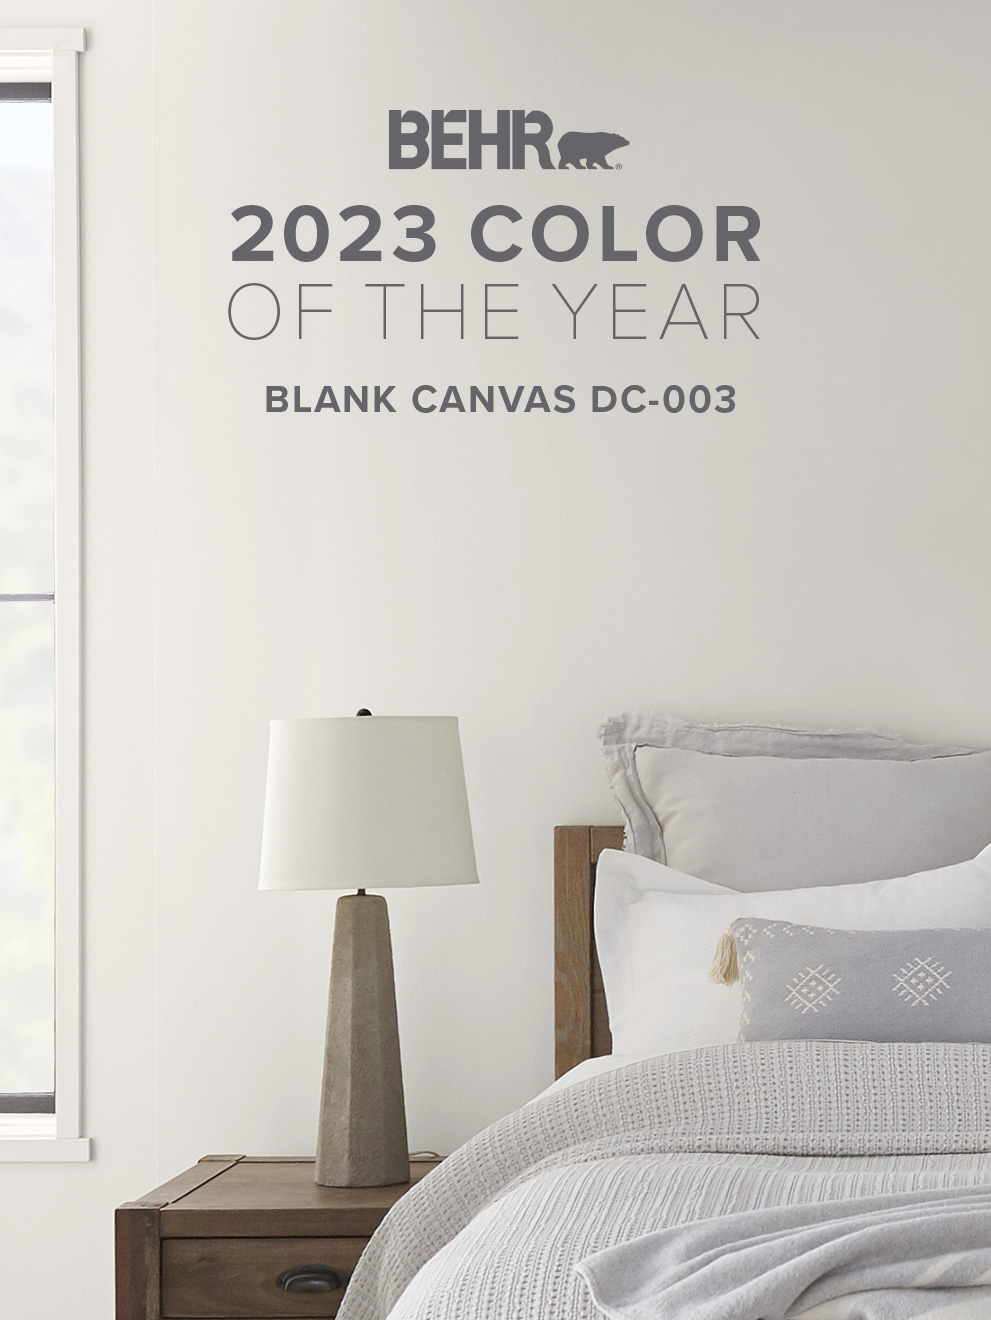 Blank Canvas DC-003 - BEHR 2023 Color of the Year